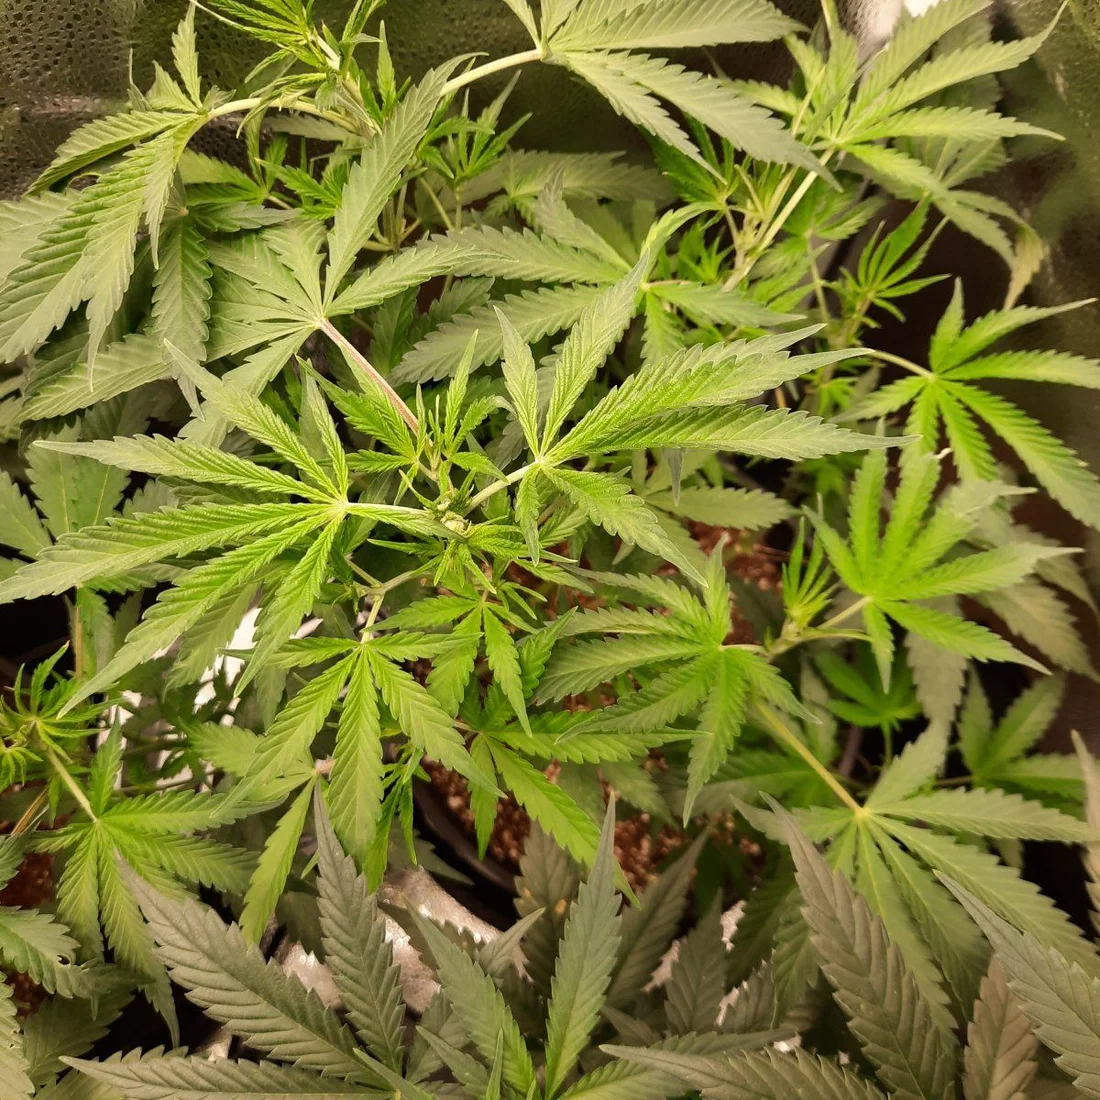 First time grow slight yellowing tips on new growth weird browning of some bottom leaves dry 